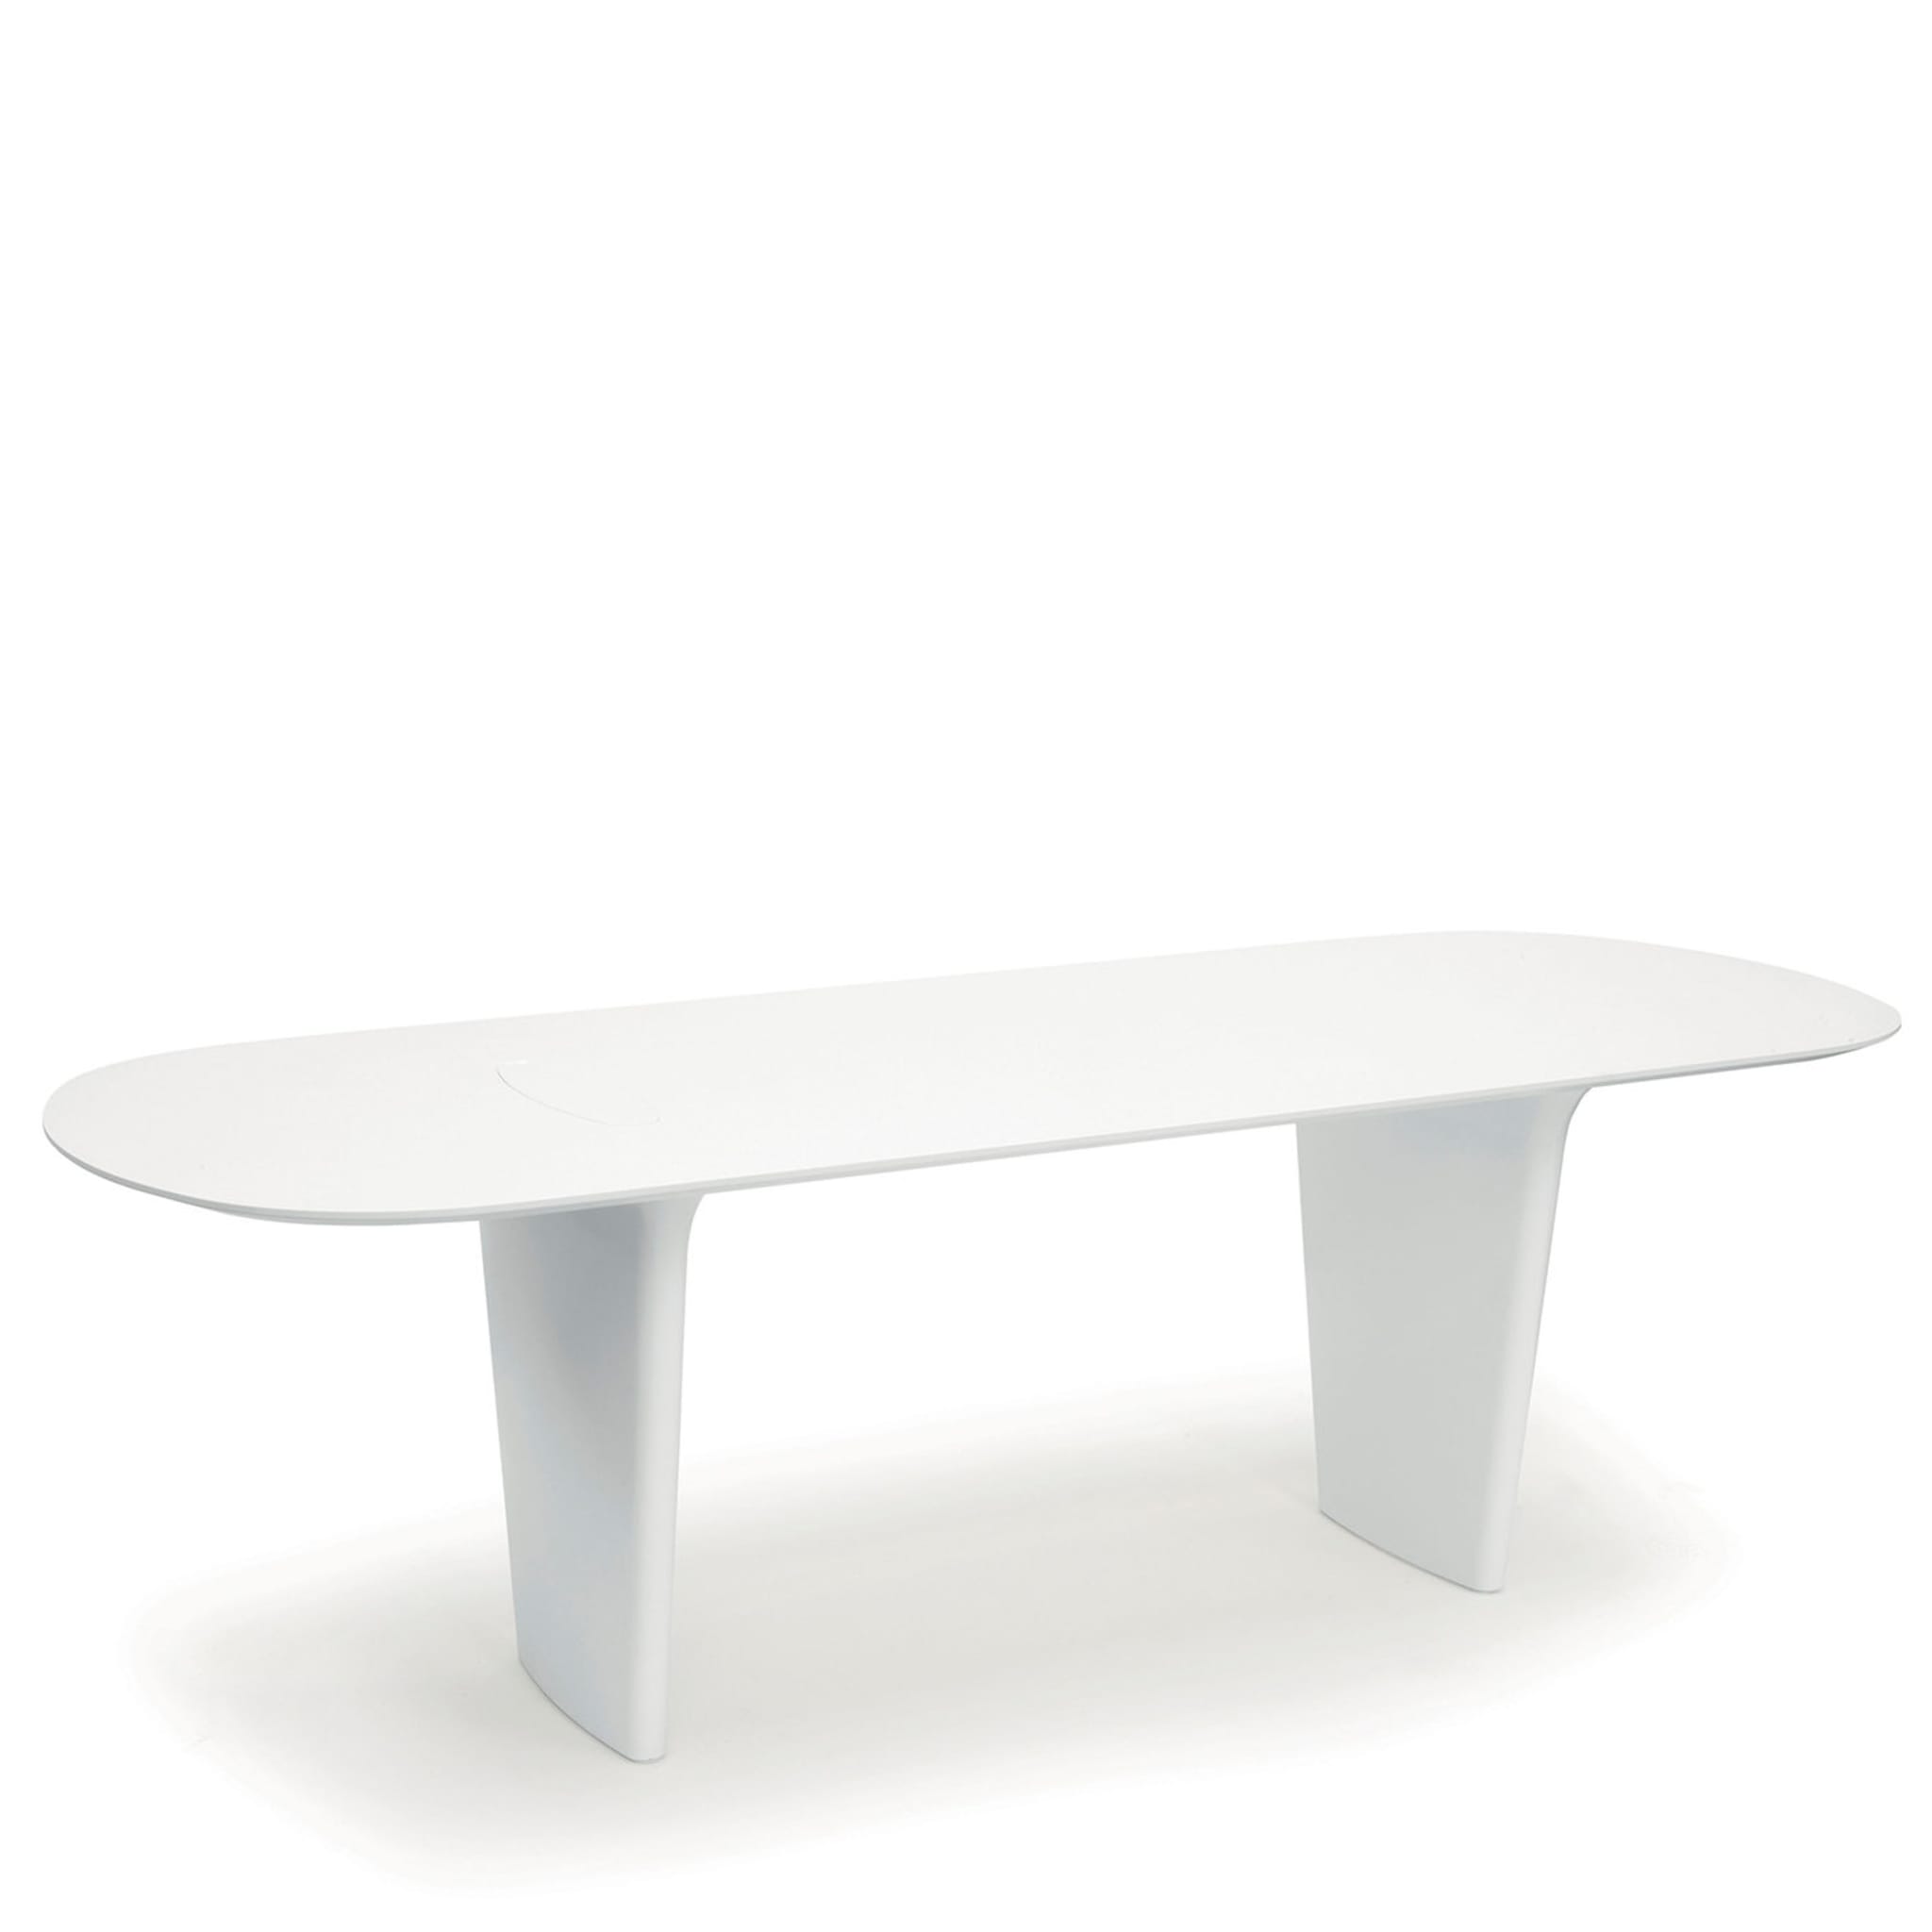 Shift White Desk by Foster + Partners - Alternative view 1